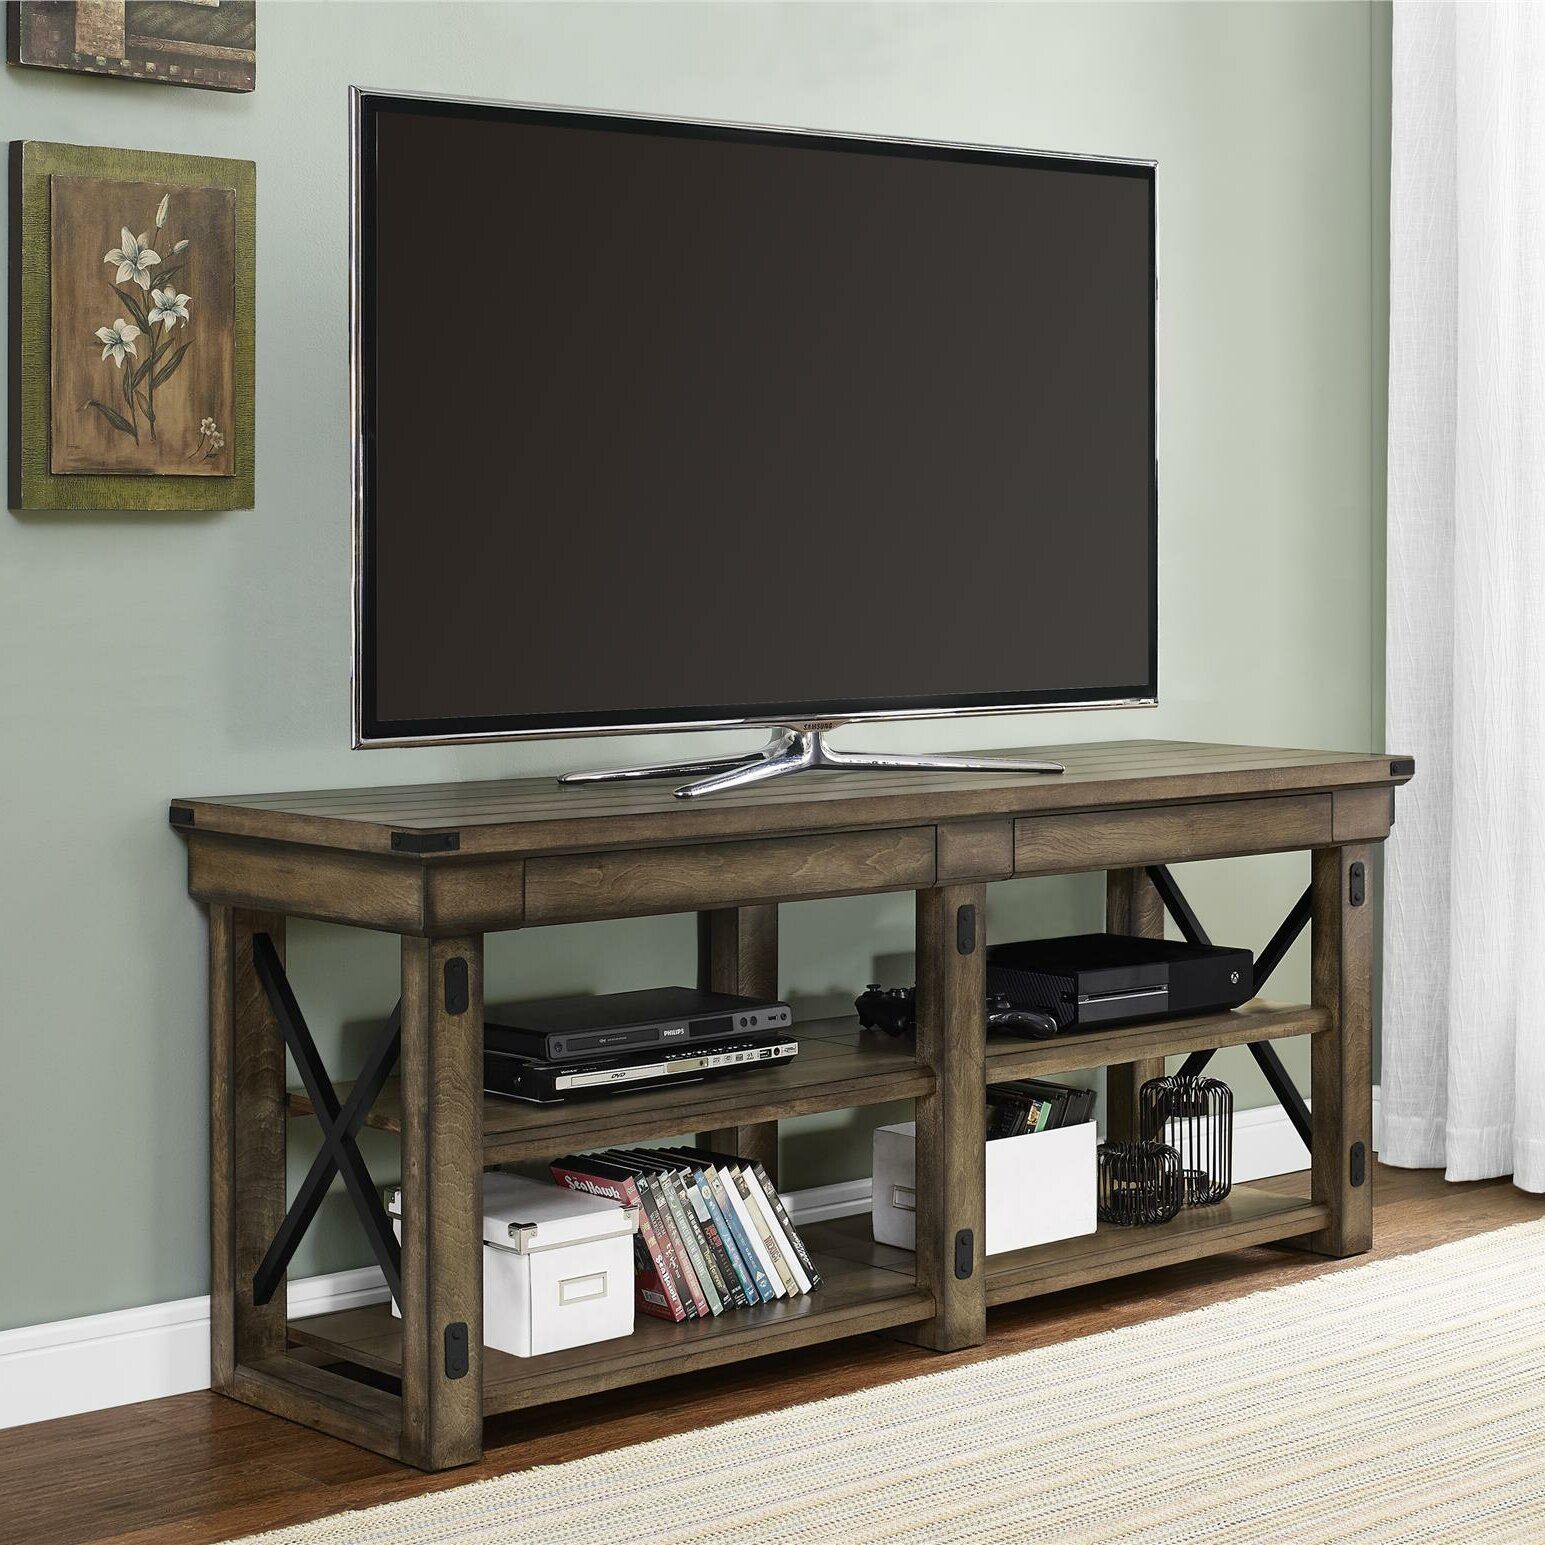 August Grove Irwin Rustic Wood Tv Stand & Reviews | Wayfair Intended For Wood Tv Floor Stands (View 2 of 15)